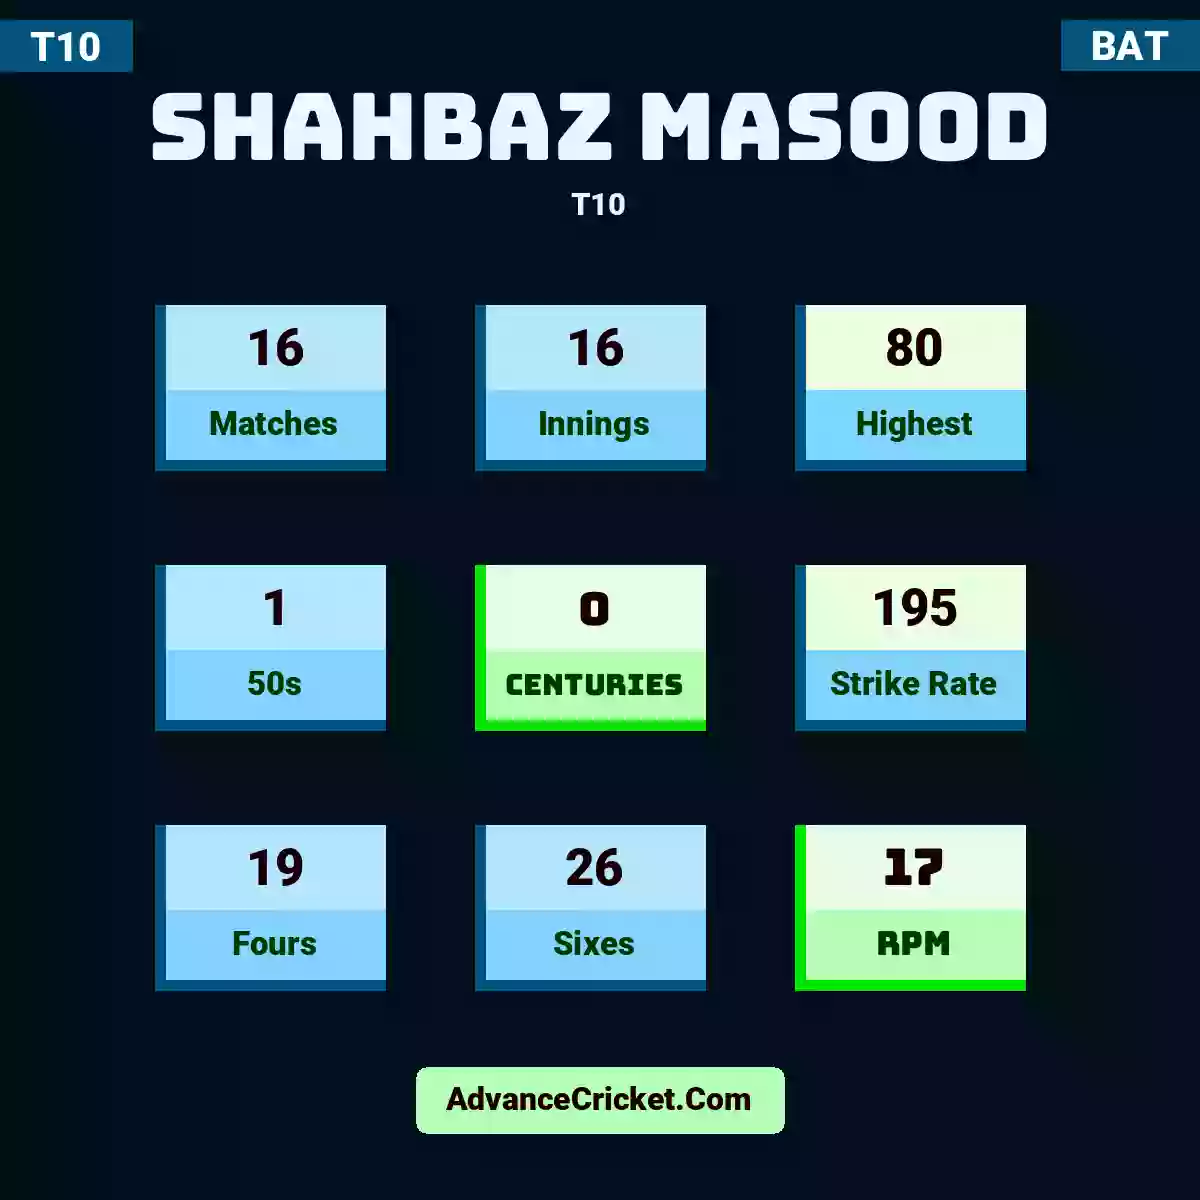 Shahbaz Masood T10 , Shahbaz Masood played 16 matches, scored 80 runs as highest, 1 half-centuries, and 0 centuries, with a strike rate of 195. S.Masood hit 19 fours and 26 sixes, with an RPM of 17.